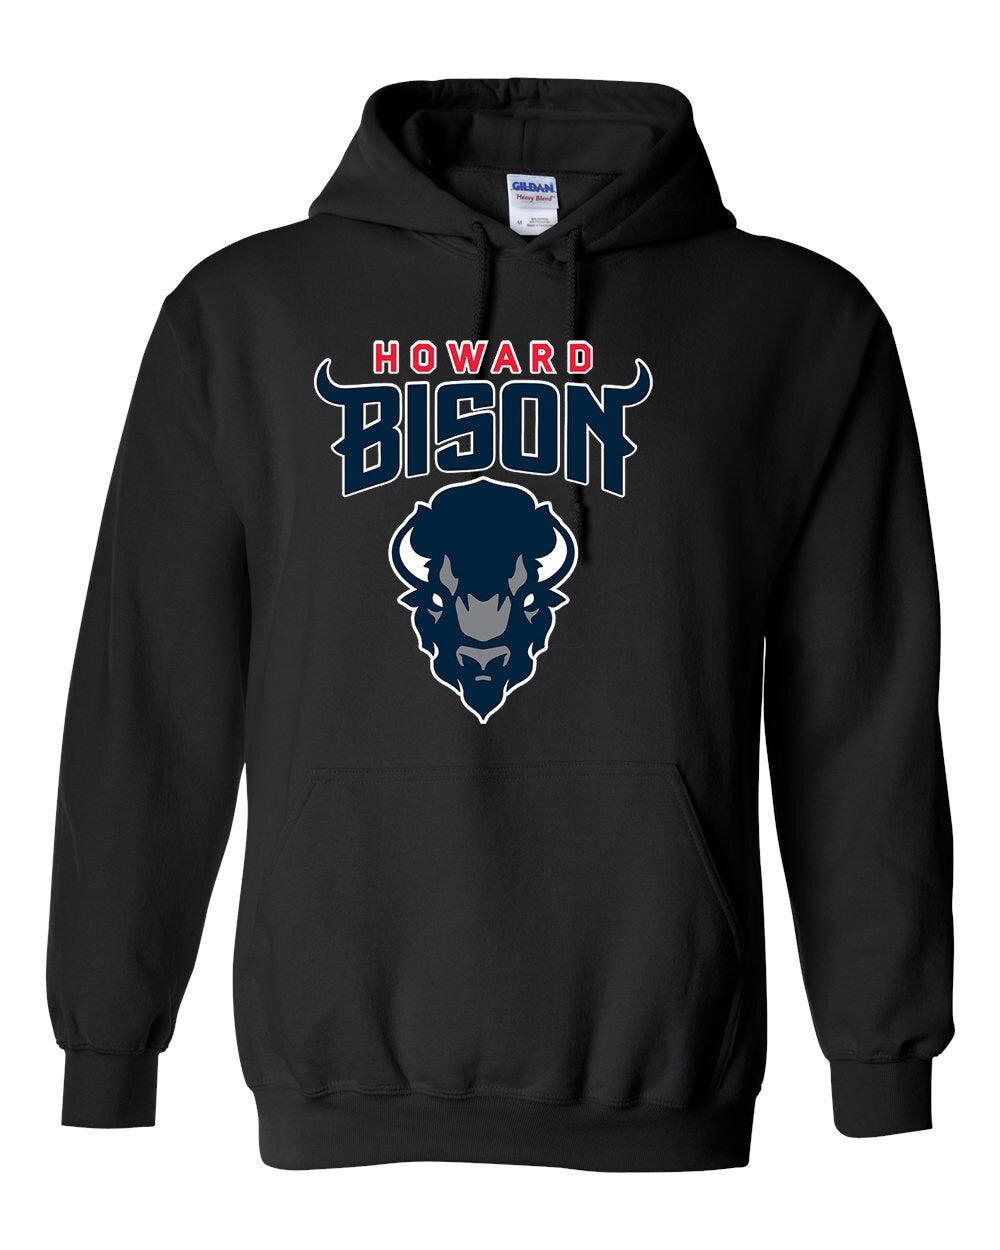 Howard University Bison Hoodie: Embrace the Strength and Pride of your HBCU